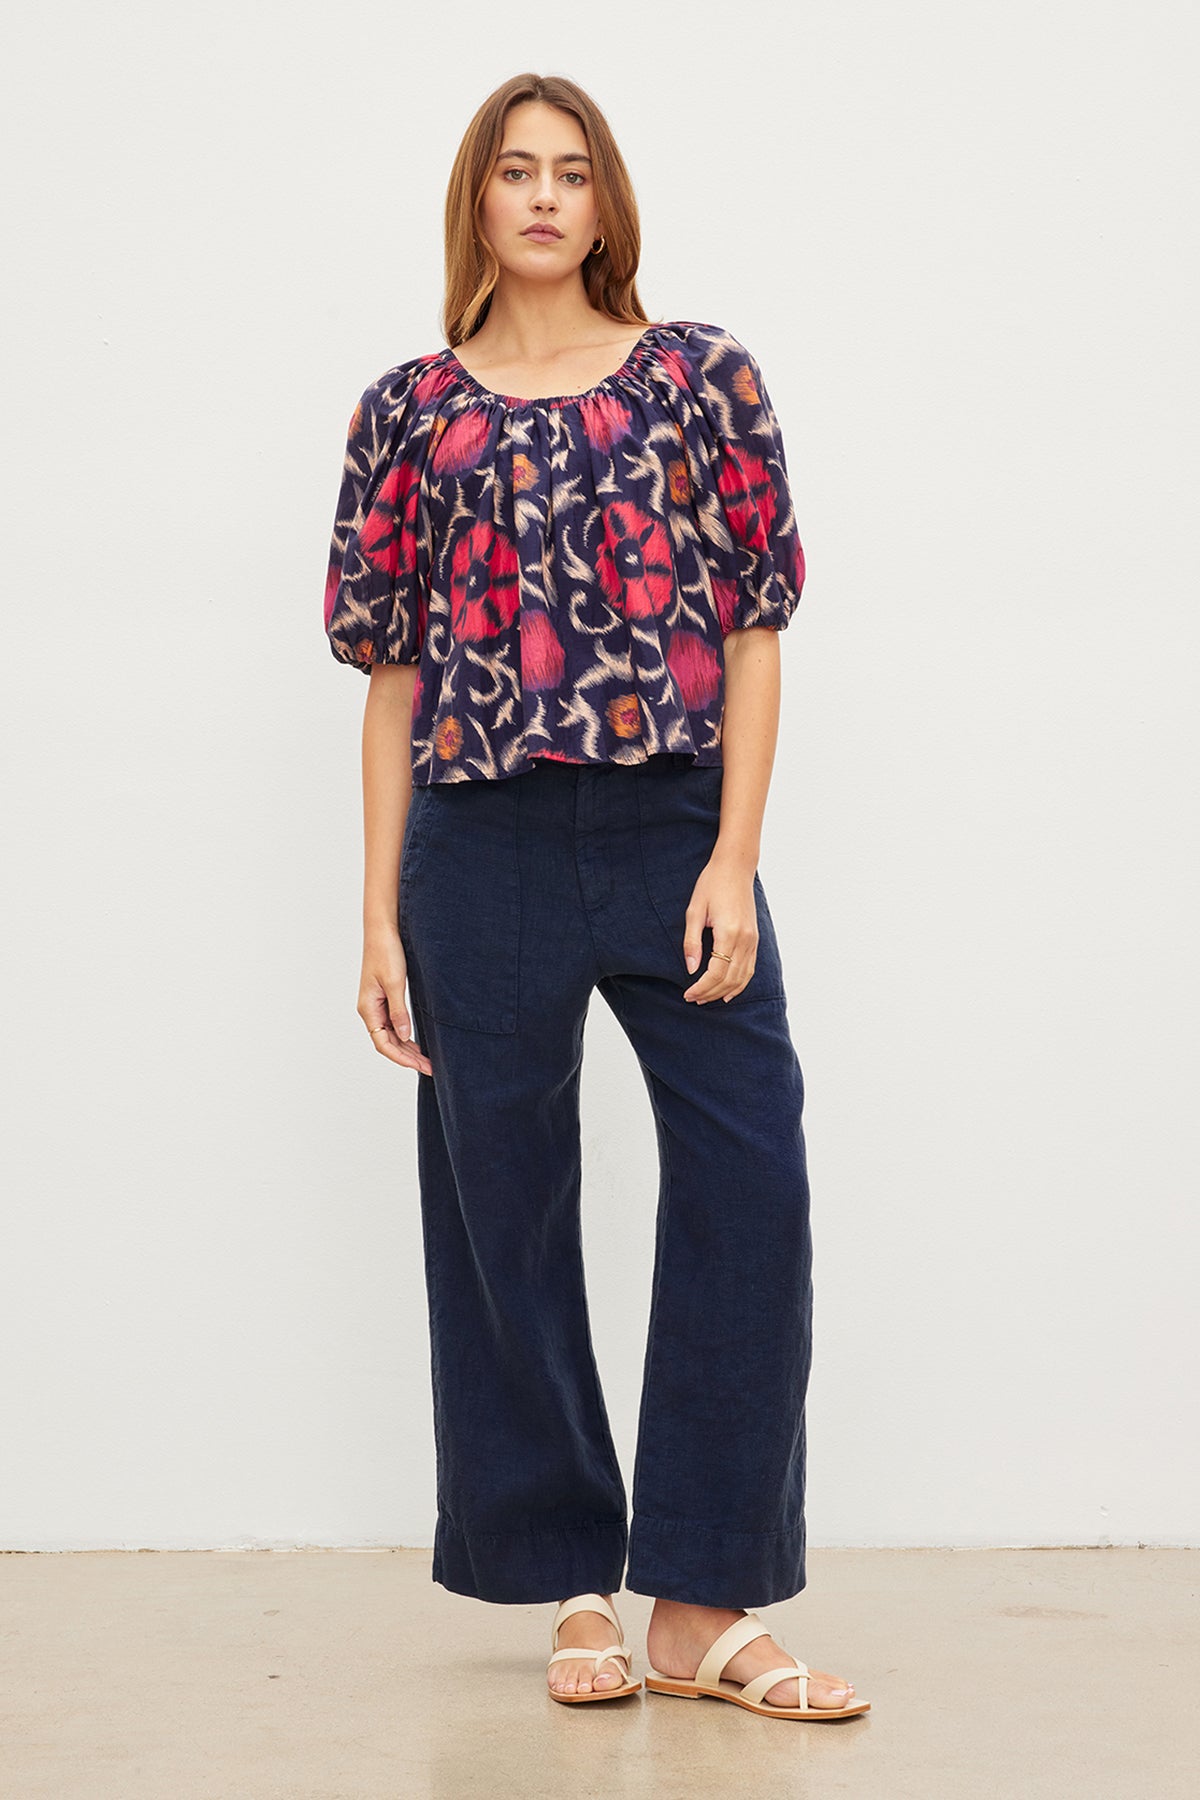 The stylish model is wearing a cool Velvet by Graham & Spencer navy floral top and wide leg pants.-35982296023233